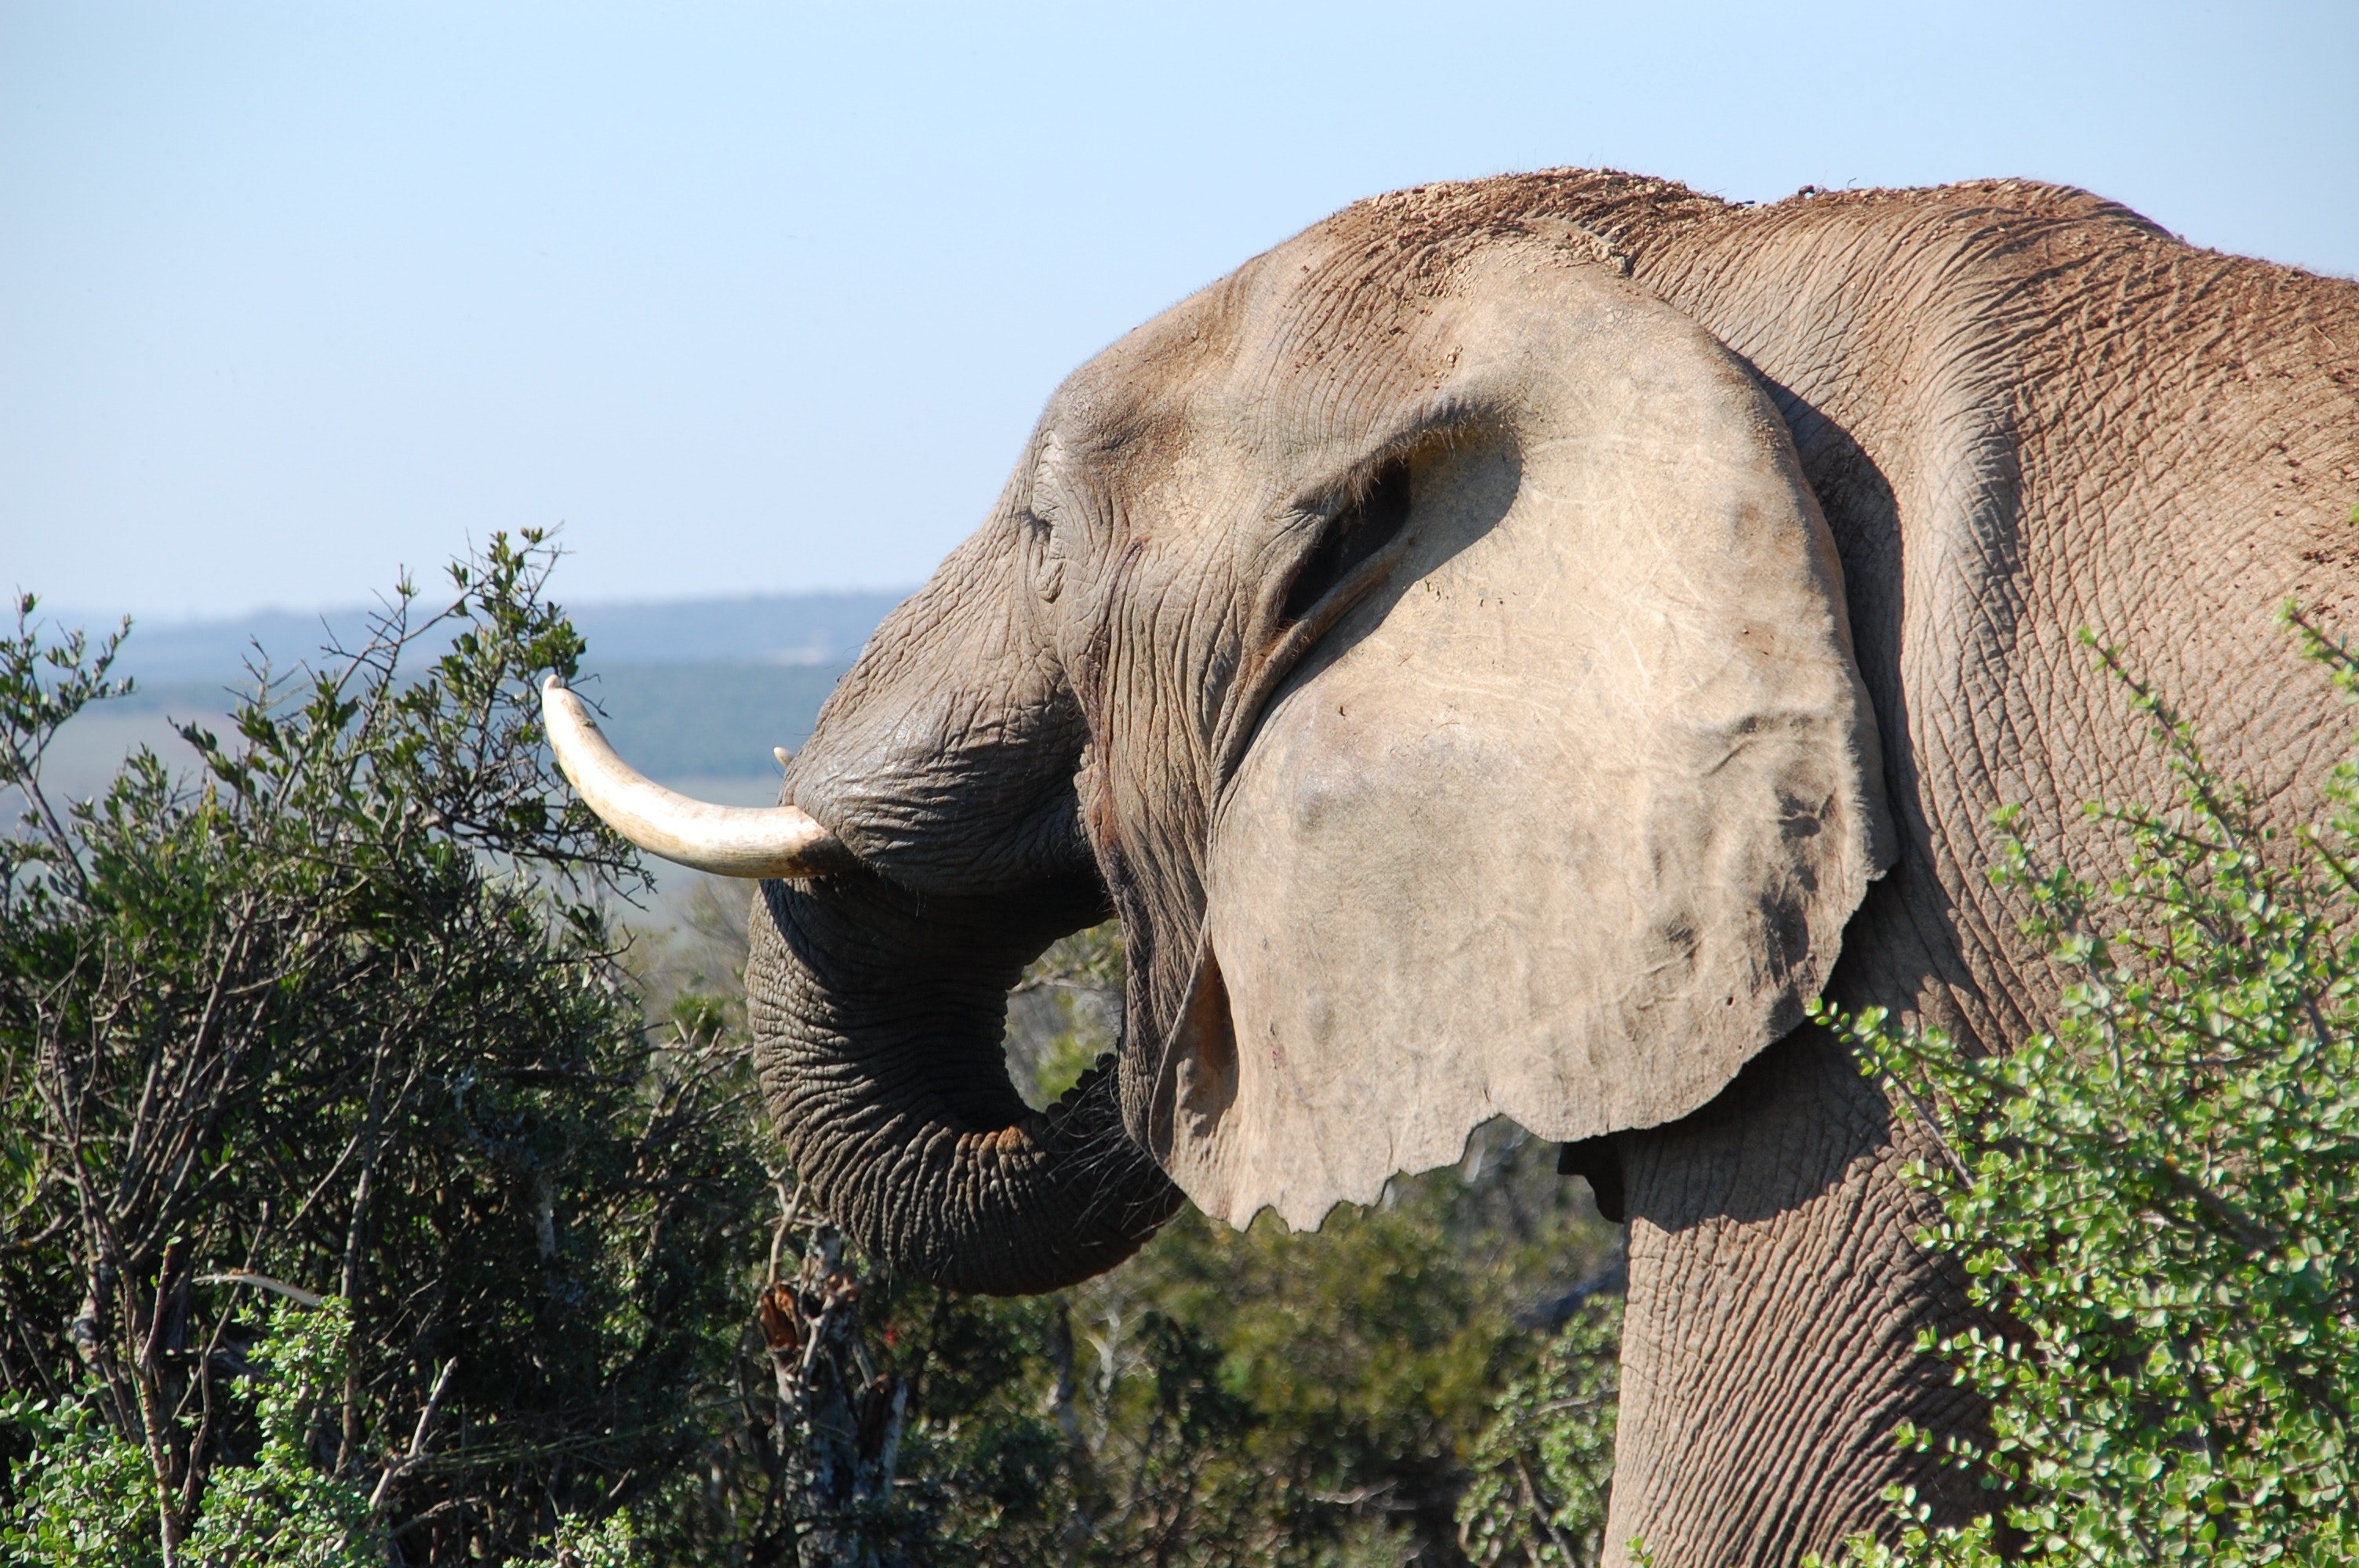 Grey elephant by the bushes at mountain top during daytime photo